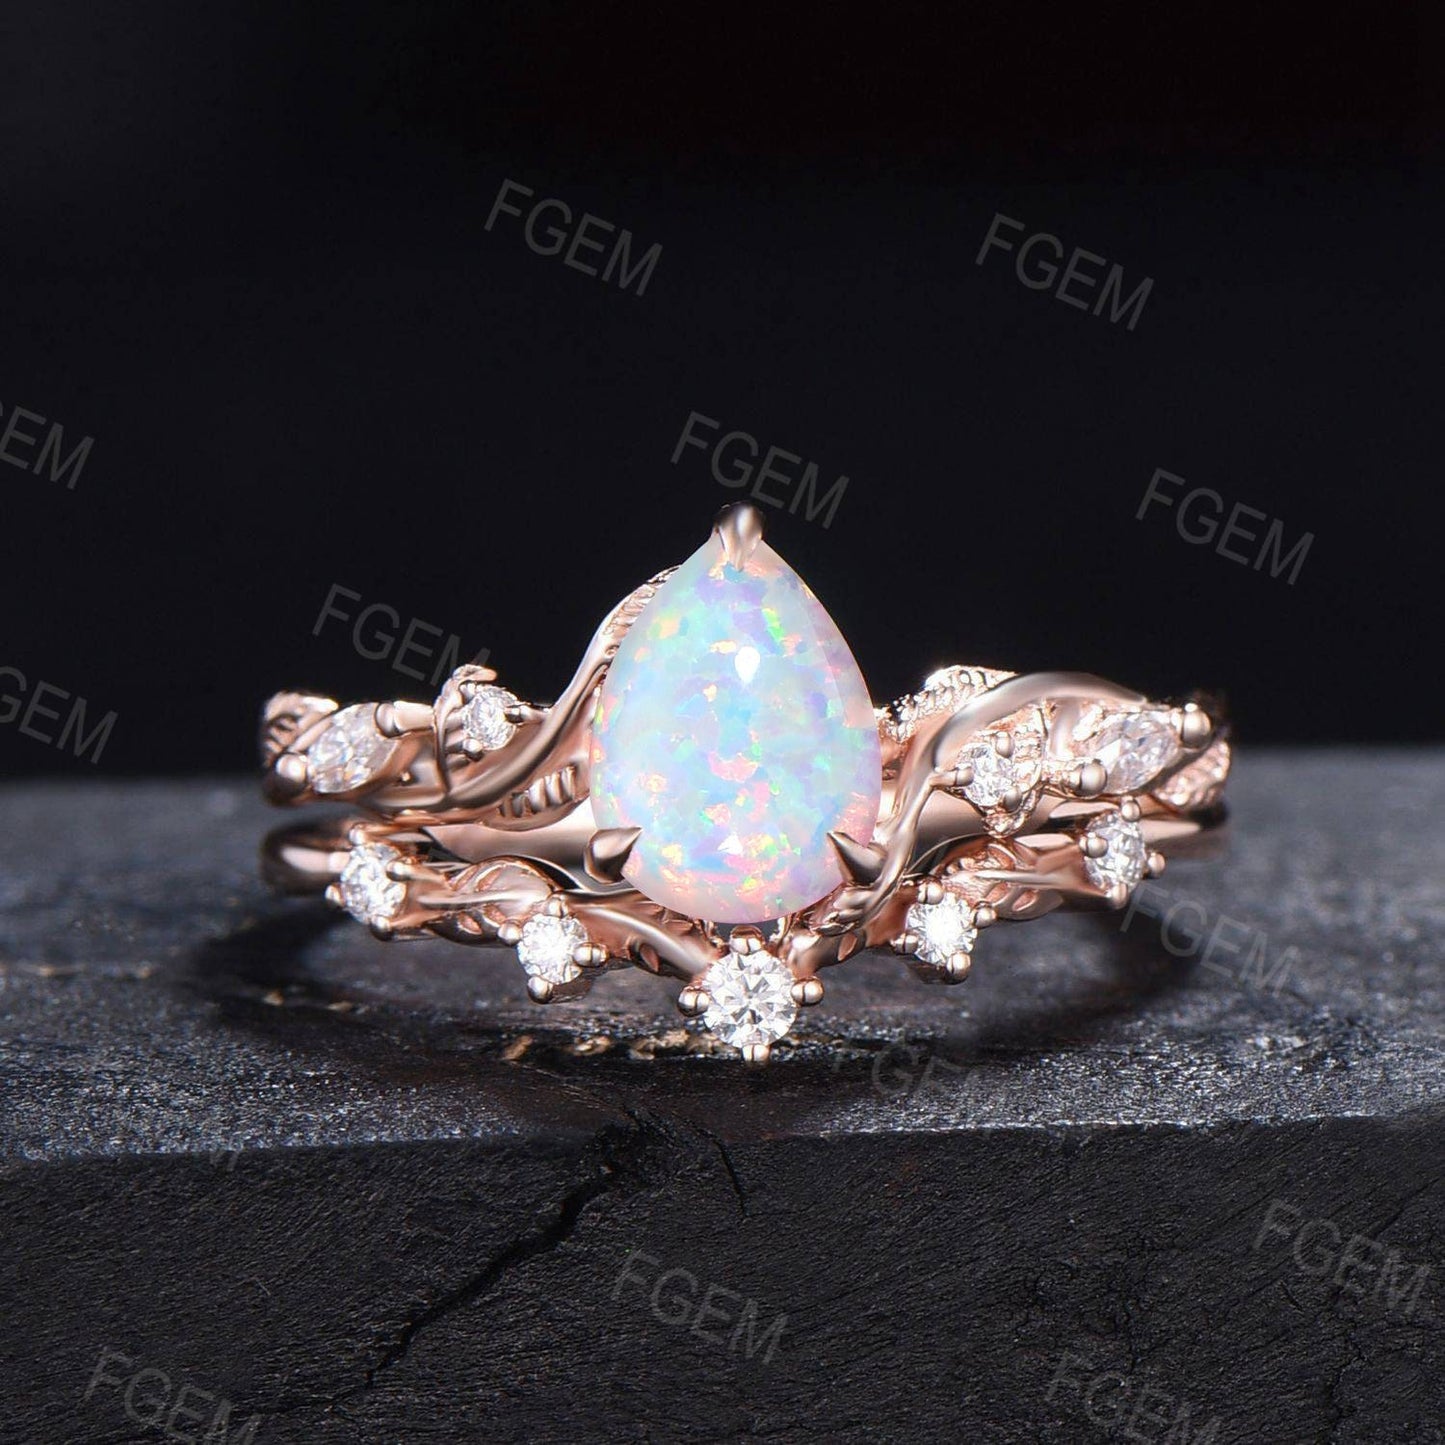 Twist Leaf Moissanite Opal Wedding Ring Set Nature Inspired White Opal Ring Set Vintage 1.25ct Pear Shaped Branch Twig Opal Engagement Ring